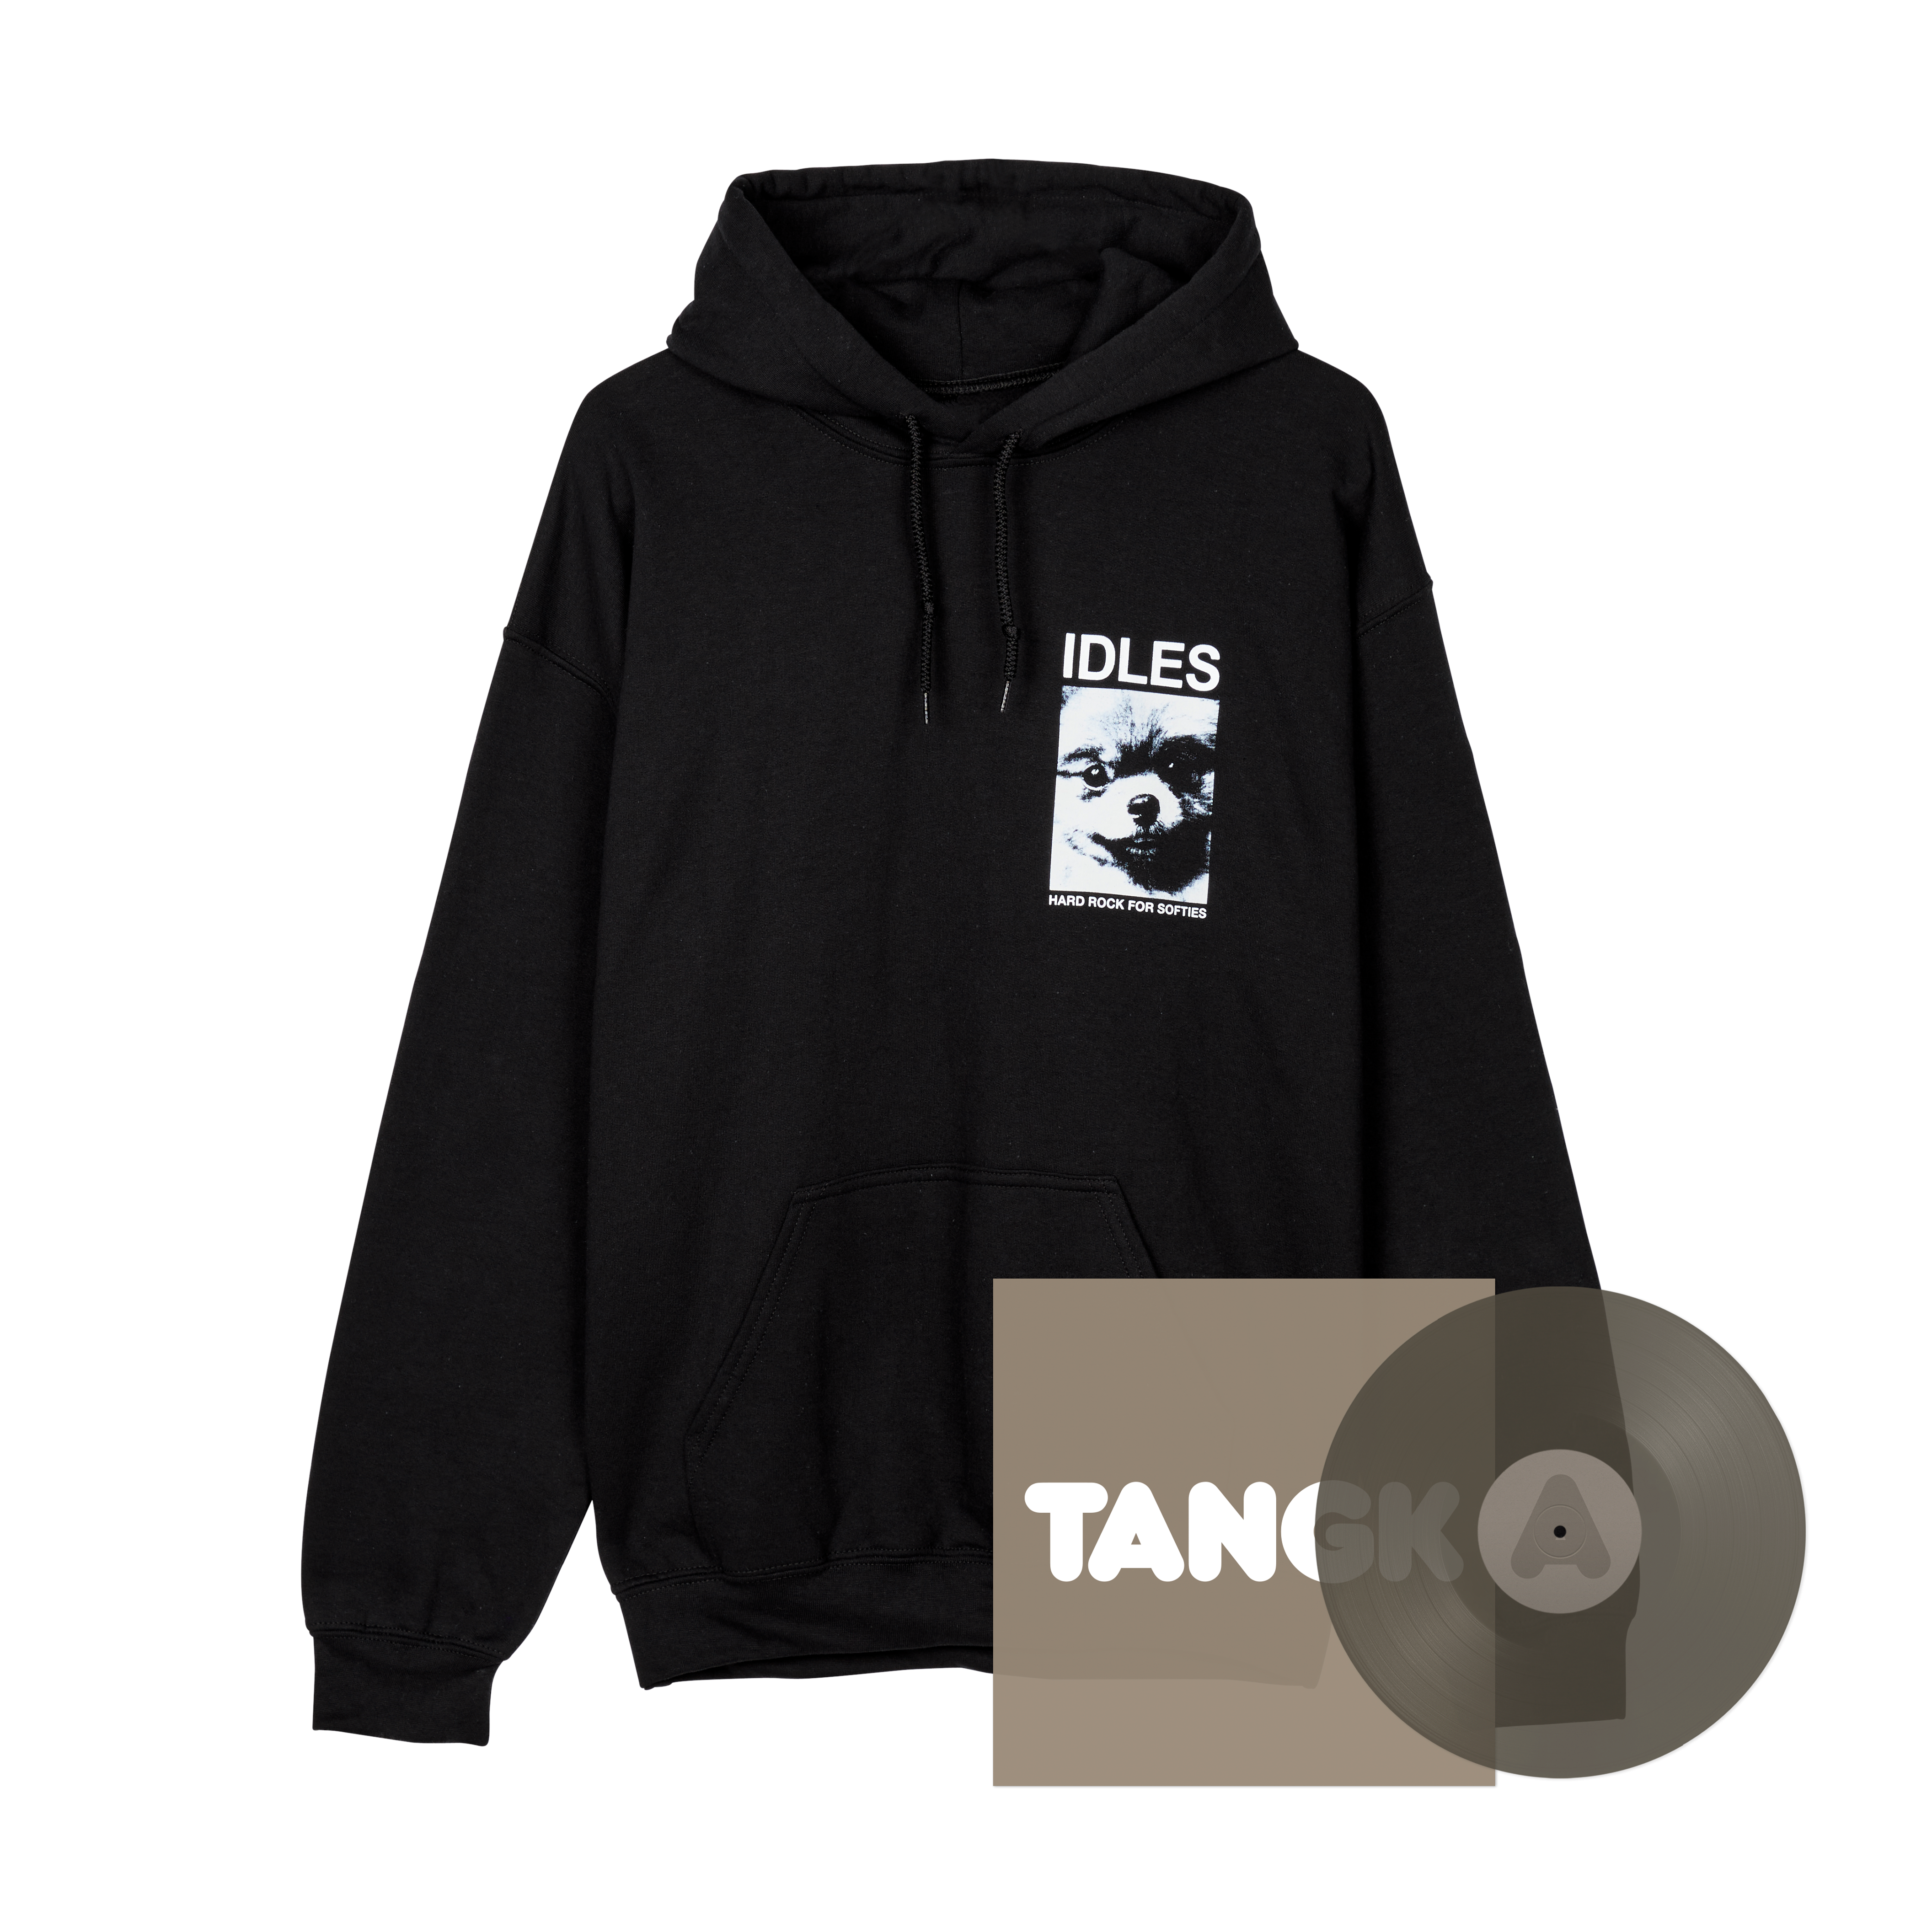 TANGK (LIMITED EDITION COLLECTOR’S D2C EXCLUSIVE PVC LP) + HARD ROCK FOR SOFTIES HOODIE BUNDLE